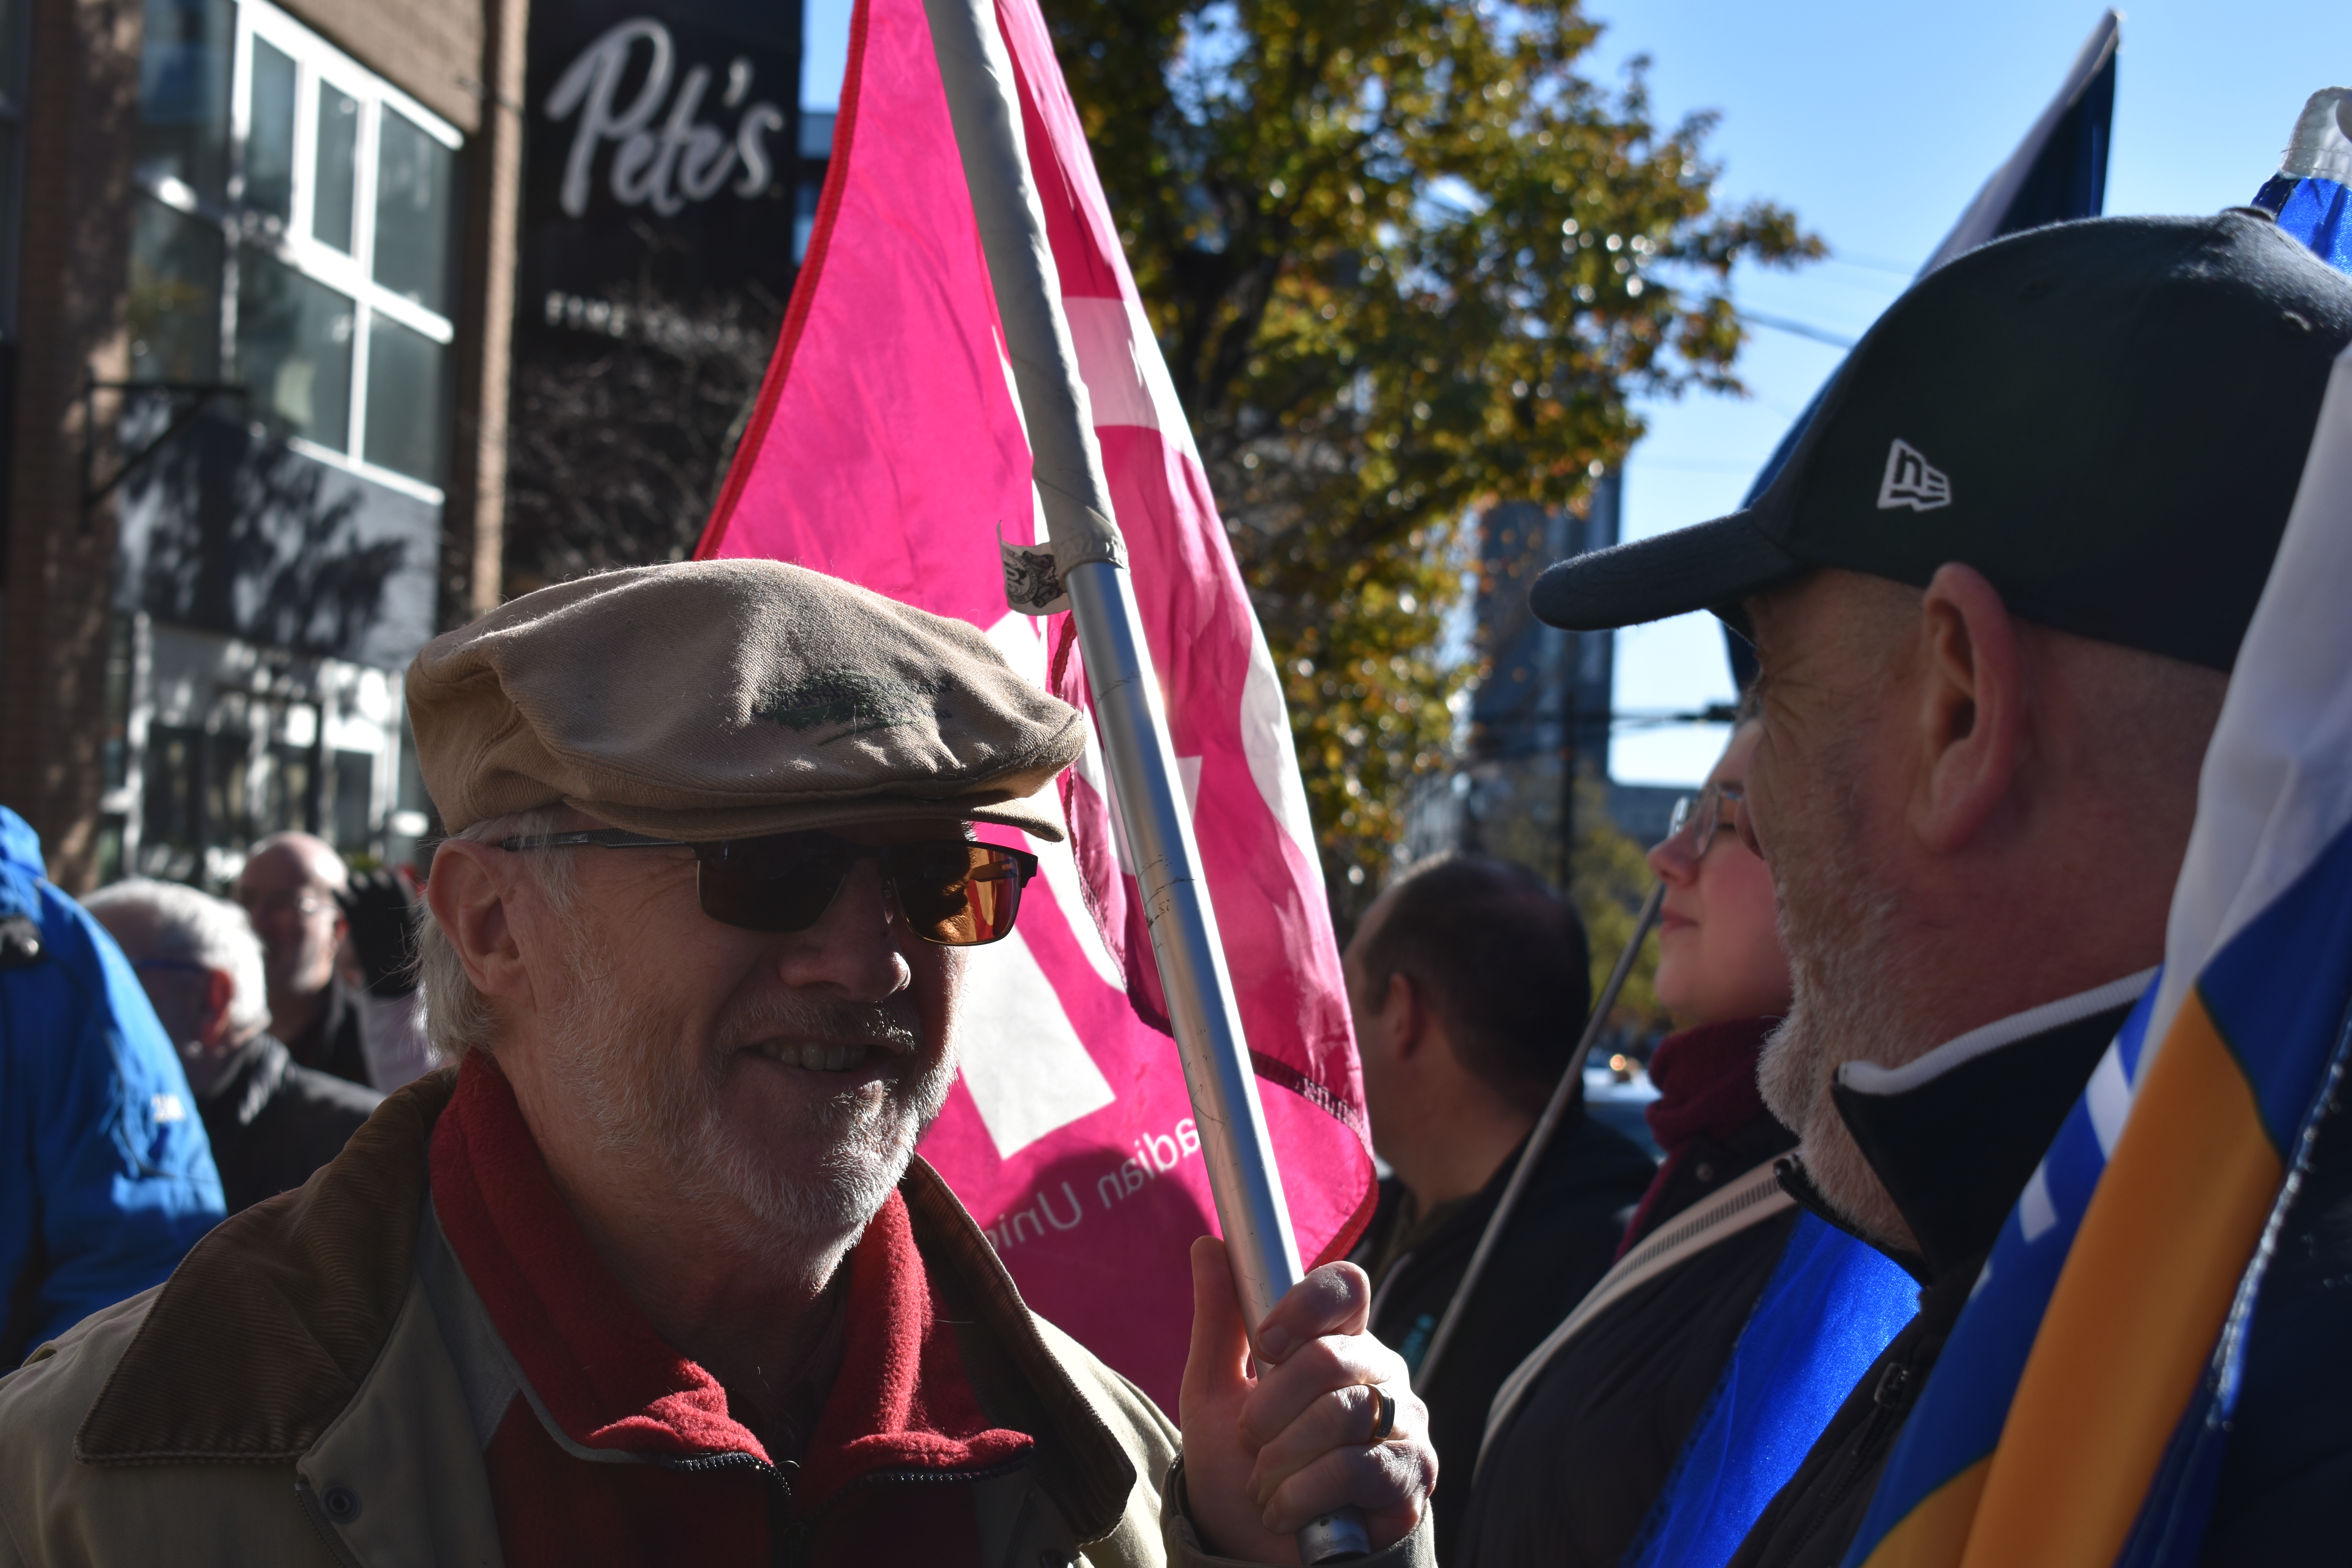 Two people are talking to each other. one on the left is holding a pink flag, while the one on the right is holding a blue and yellow flag.